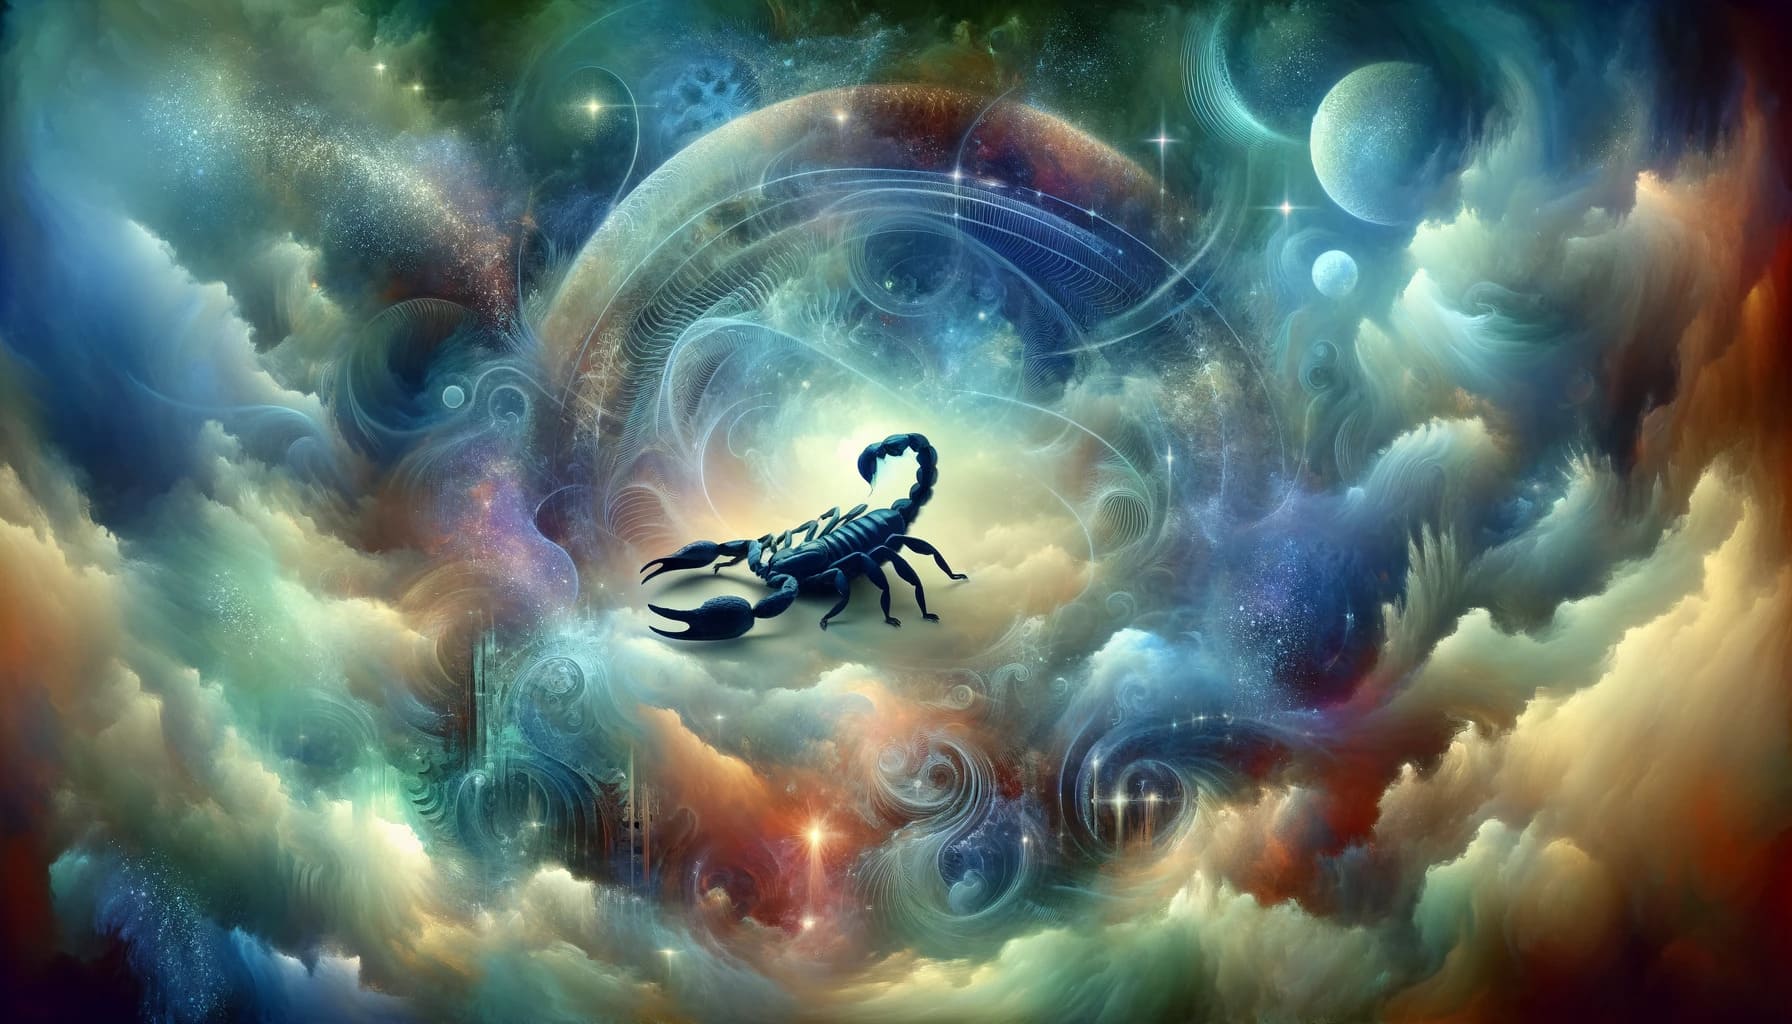 spiritual meaning of scorpion in dreams